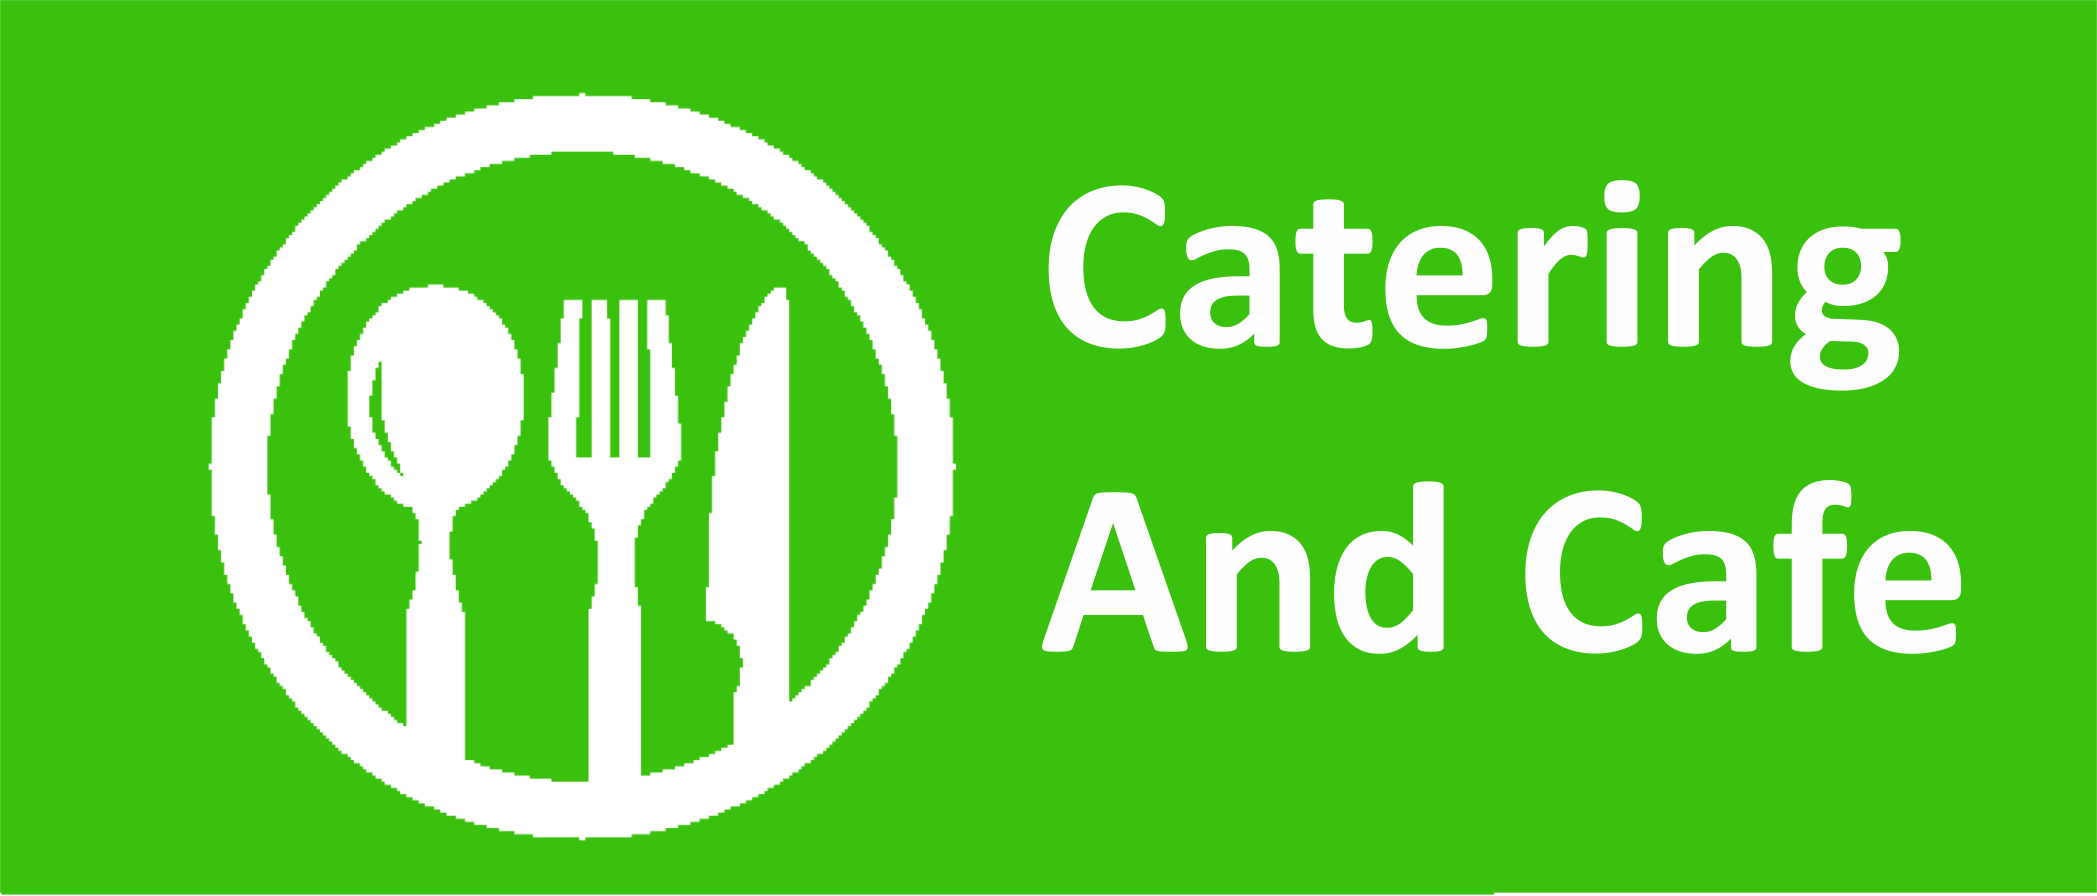 Catering & Cafe